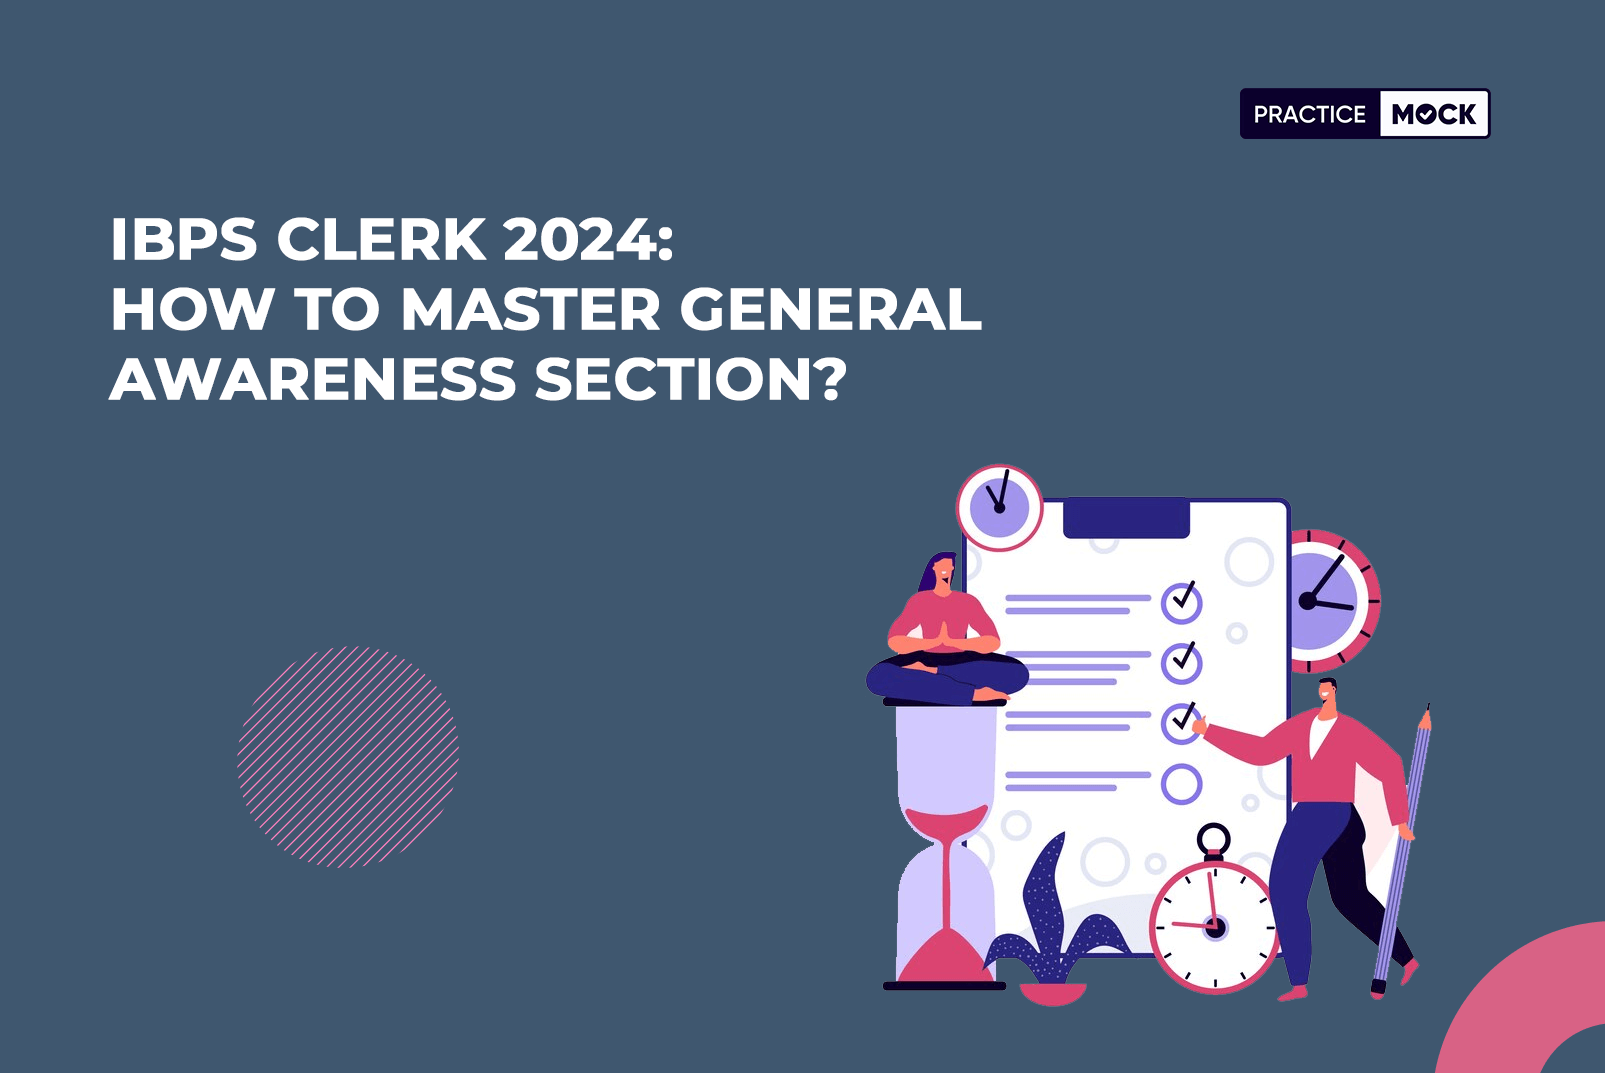 IBPS Clerk 2024: How to Master General Awareness Section in 5 Months?